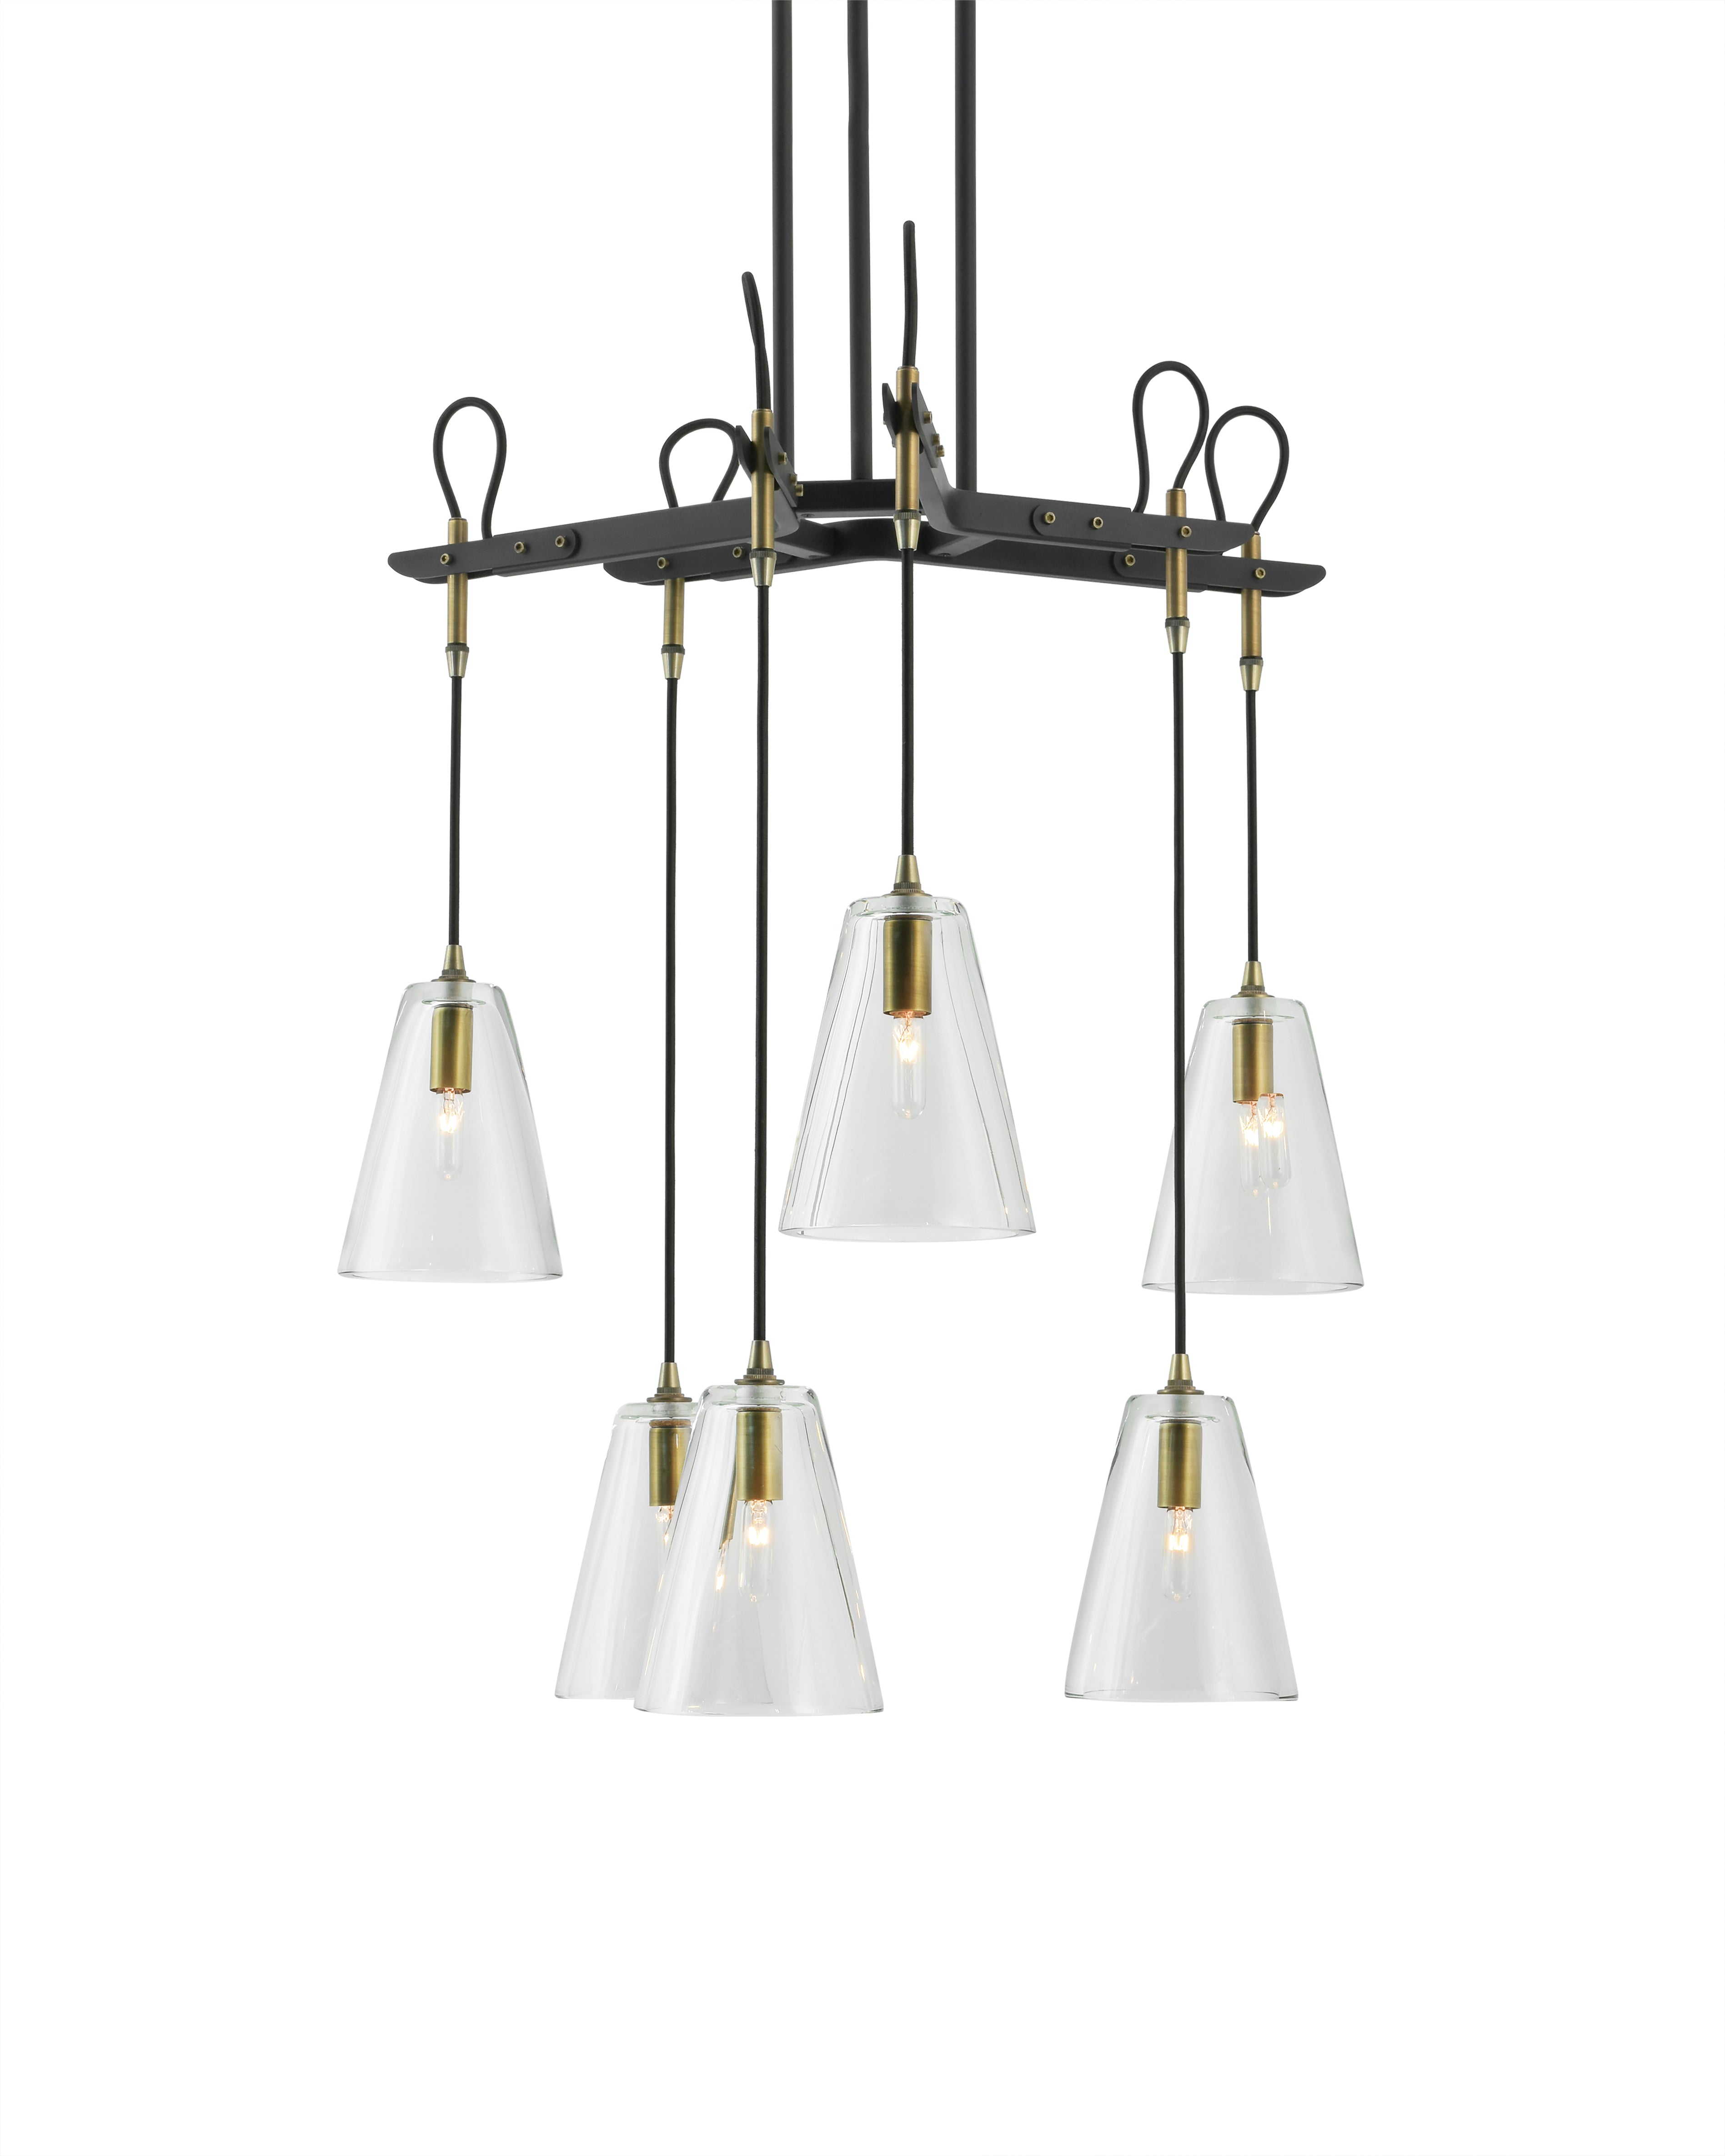 Patinated Steel with Light Antique Brass accents and Clear Glass